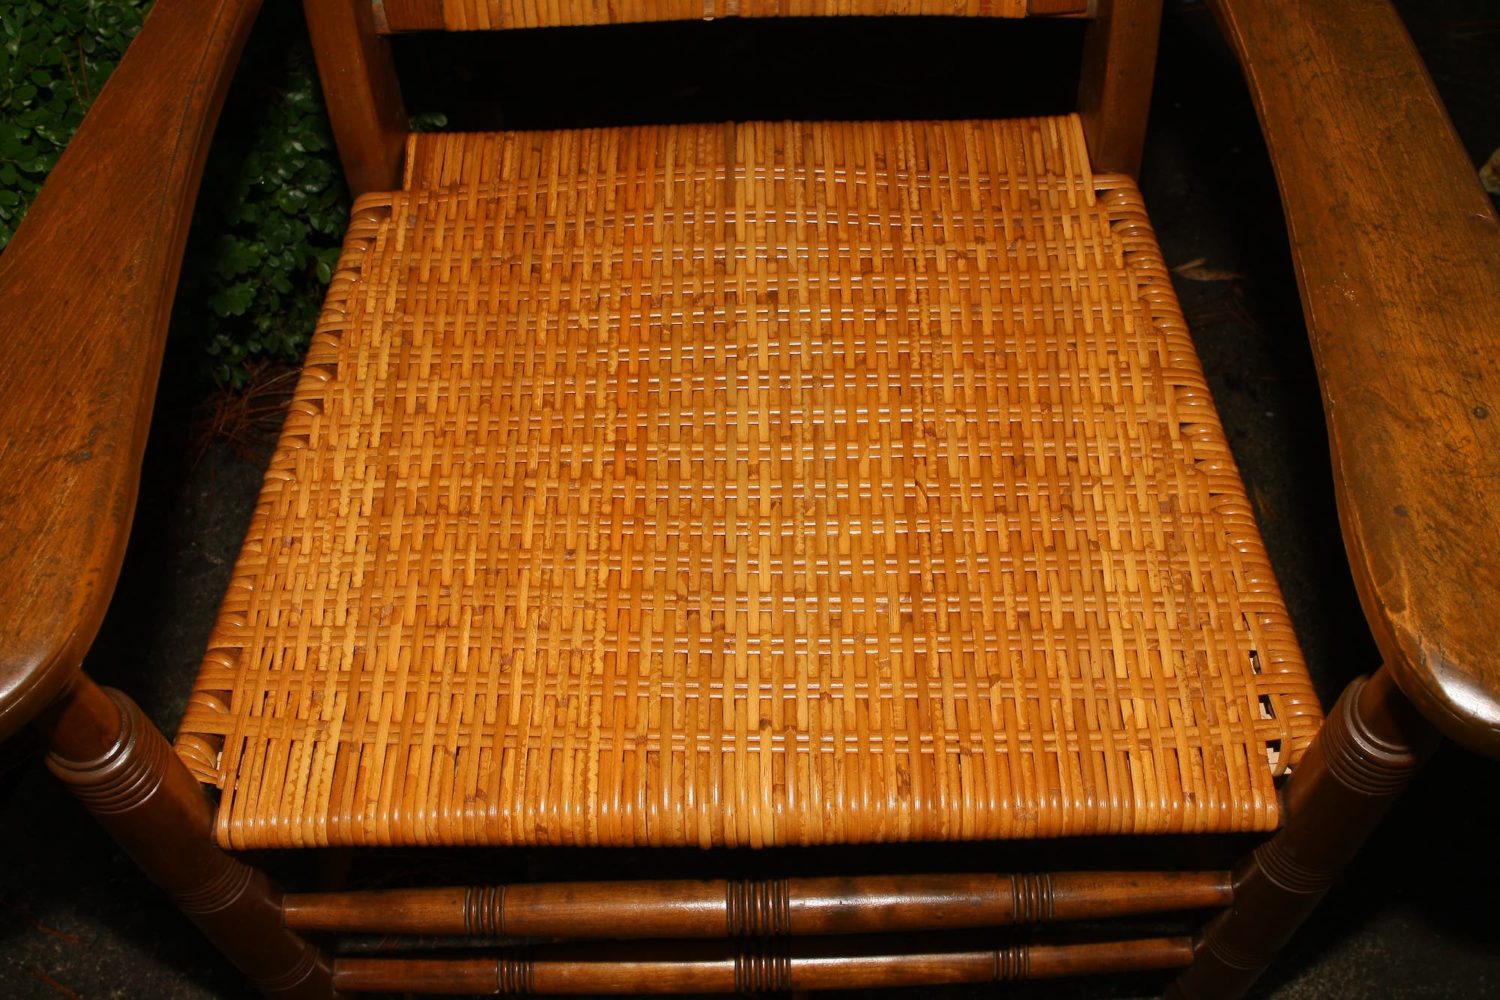 Splint Woven Seats A Cane Wood and Wicker Fixer